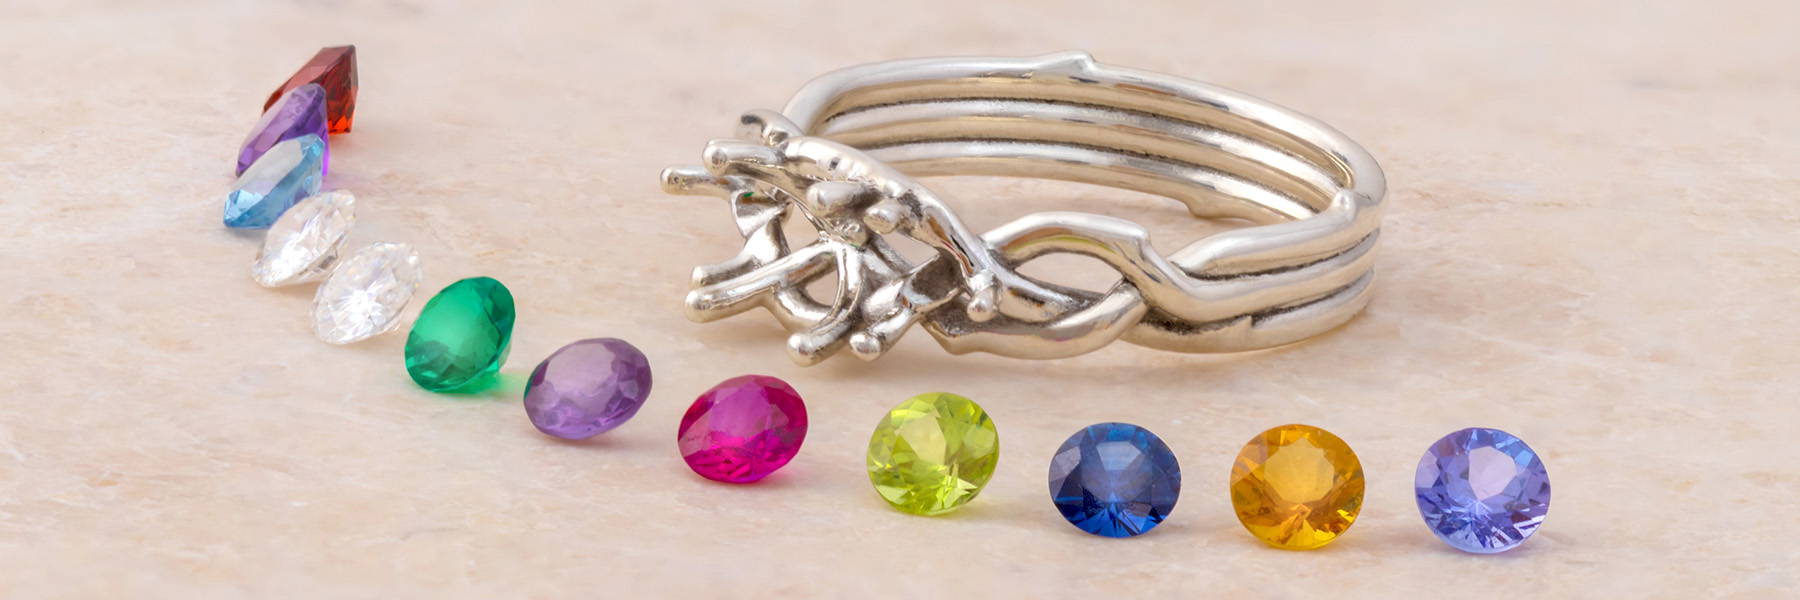 Why Gemstones Fall from Rings and How to Prevent It: Expert Tips from Jewelry By Johan